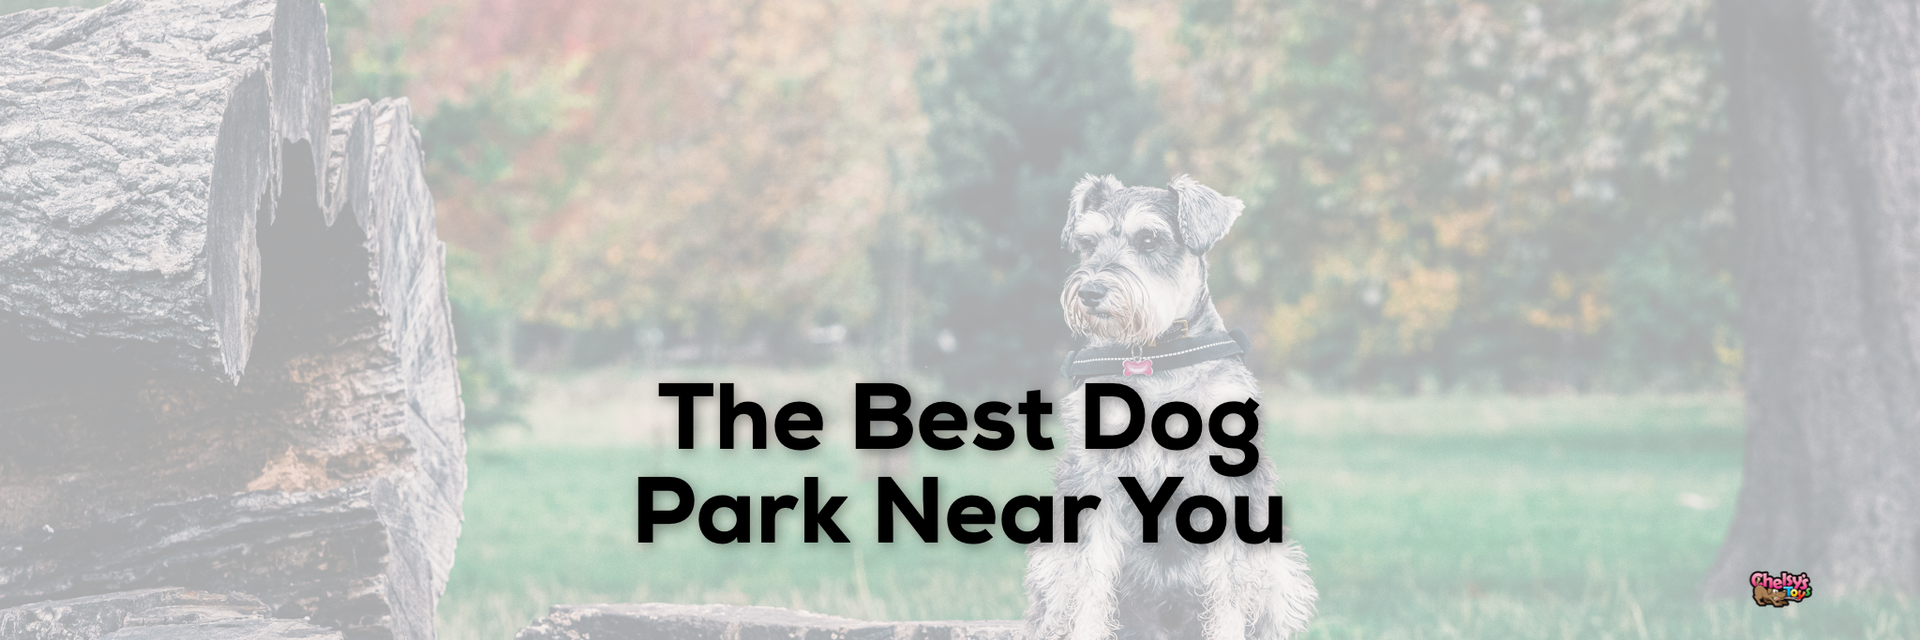 Off leash dog park study published; Lincoln Park and West Seattle